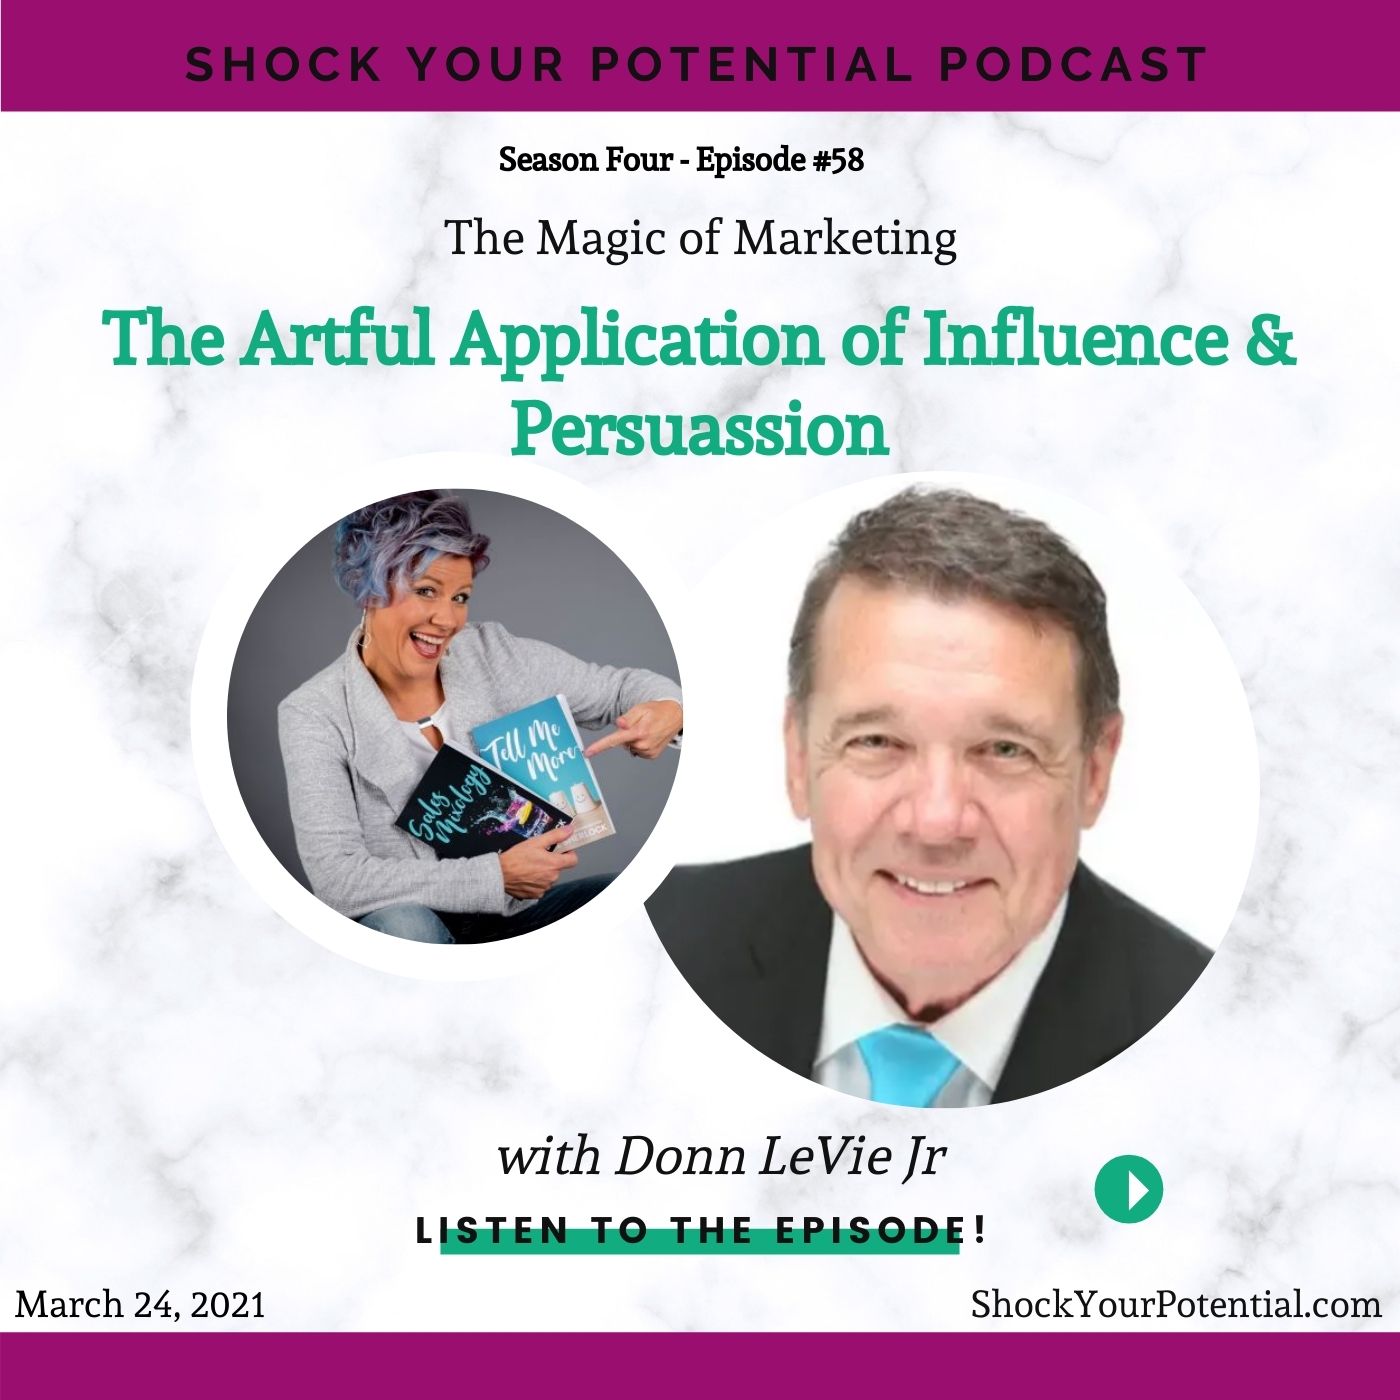 The Artful Application of Influence & Persuasion – Donn LeVie Jr.